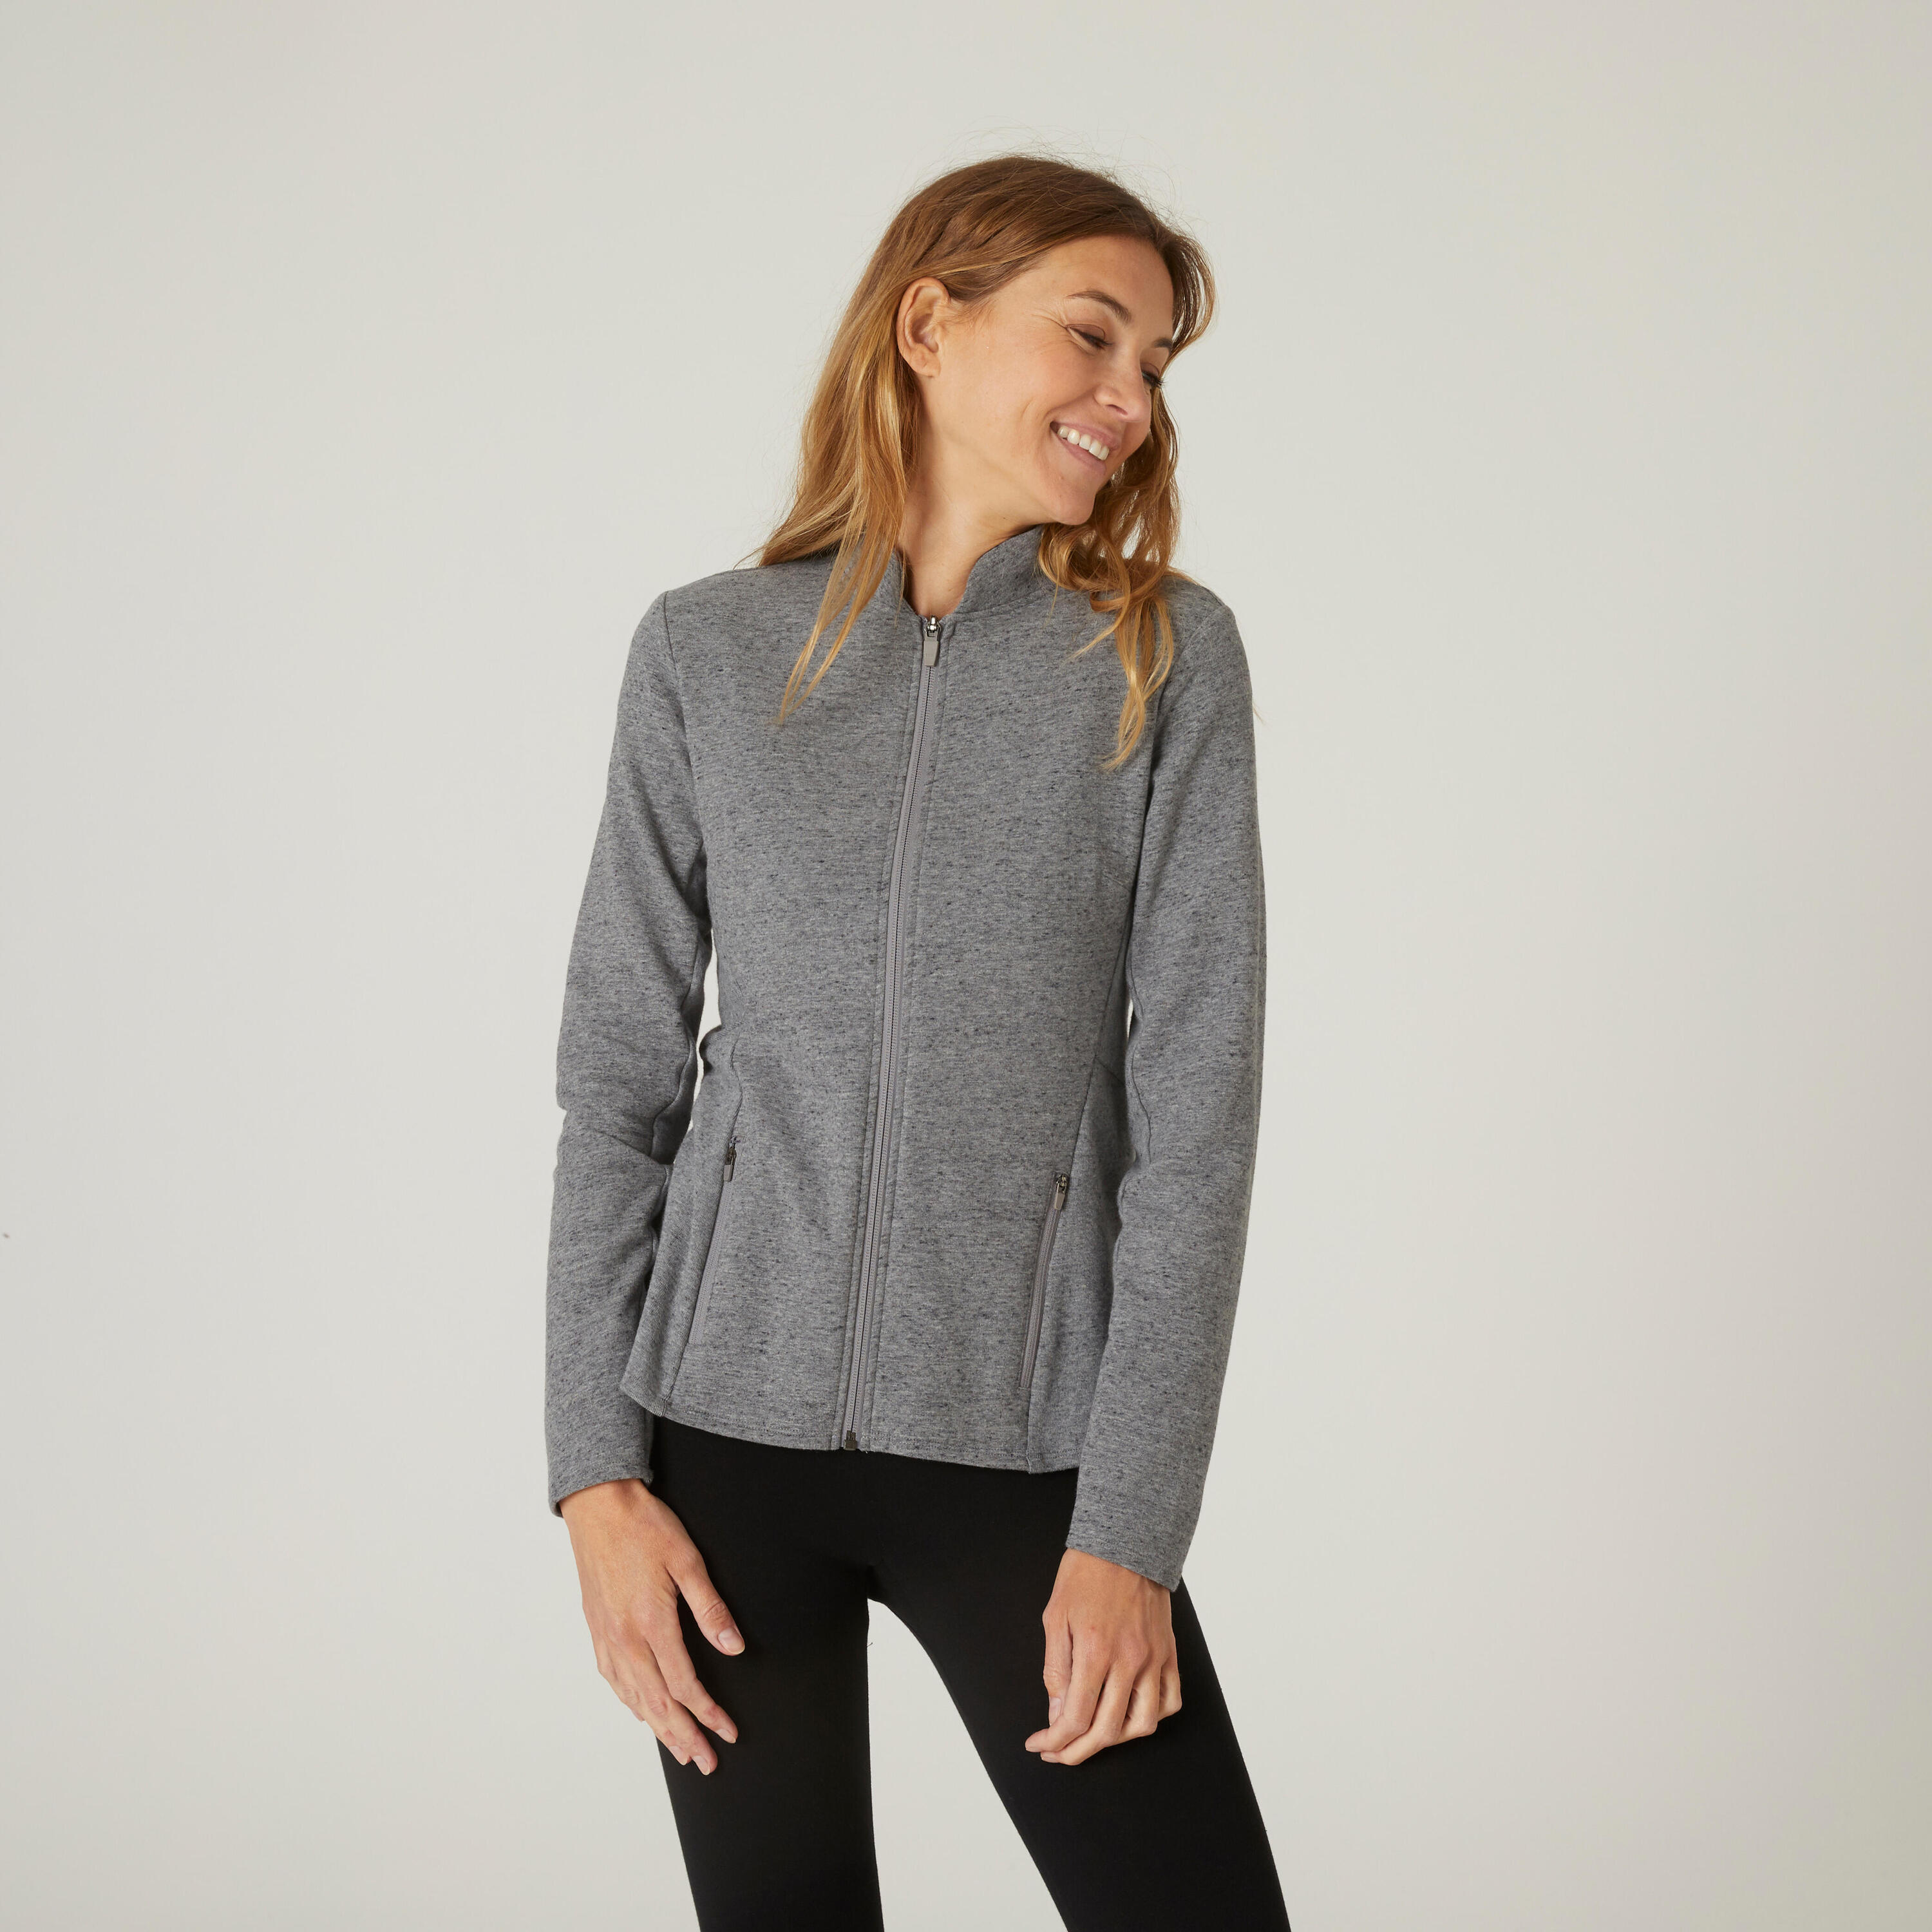 Women's Fitted High Neck Zipped Sweatshirt With Pocket 520 - Grey 1/7